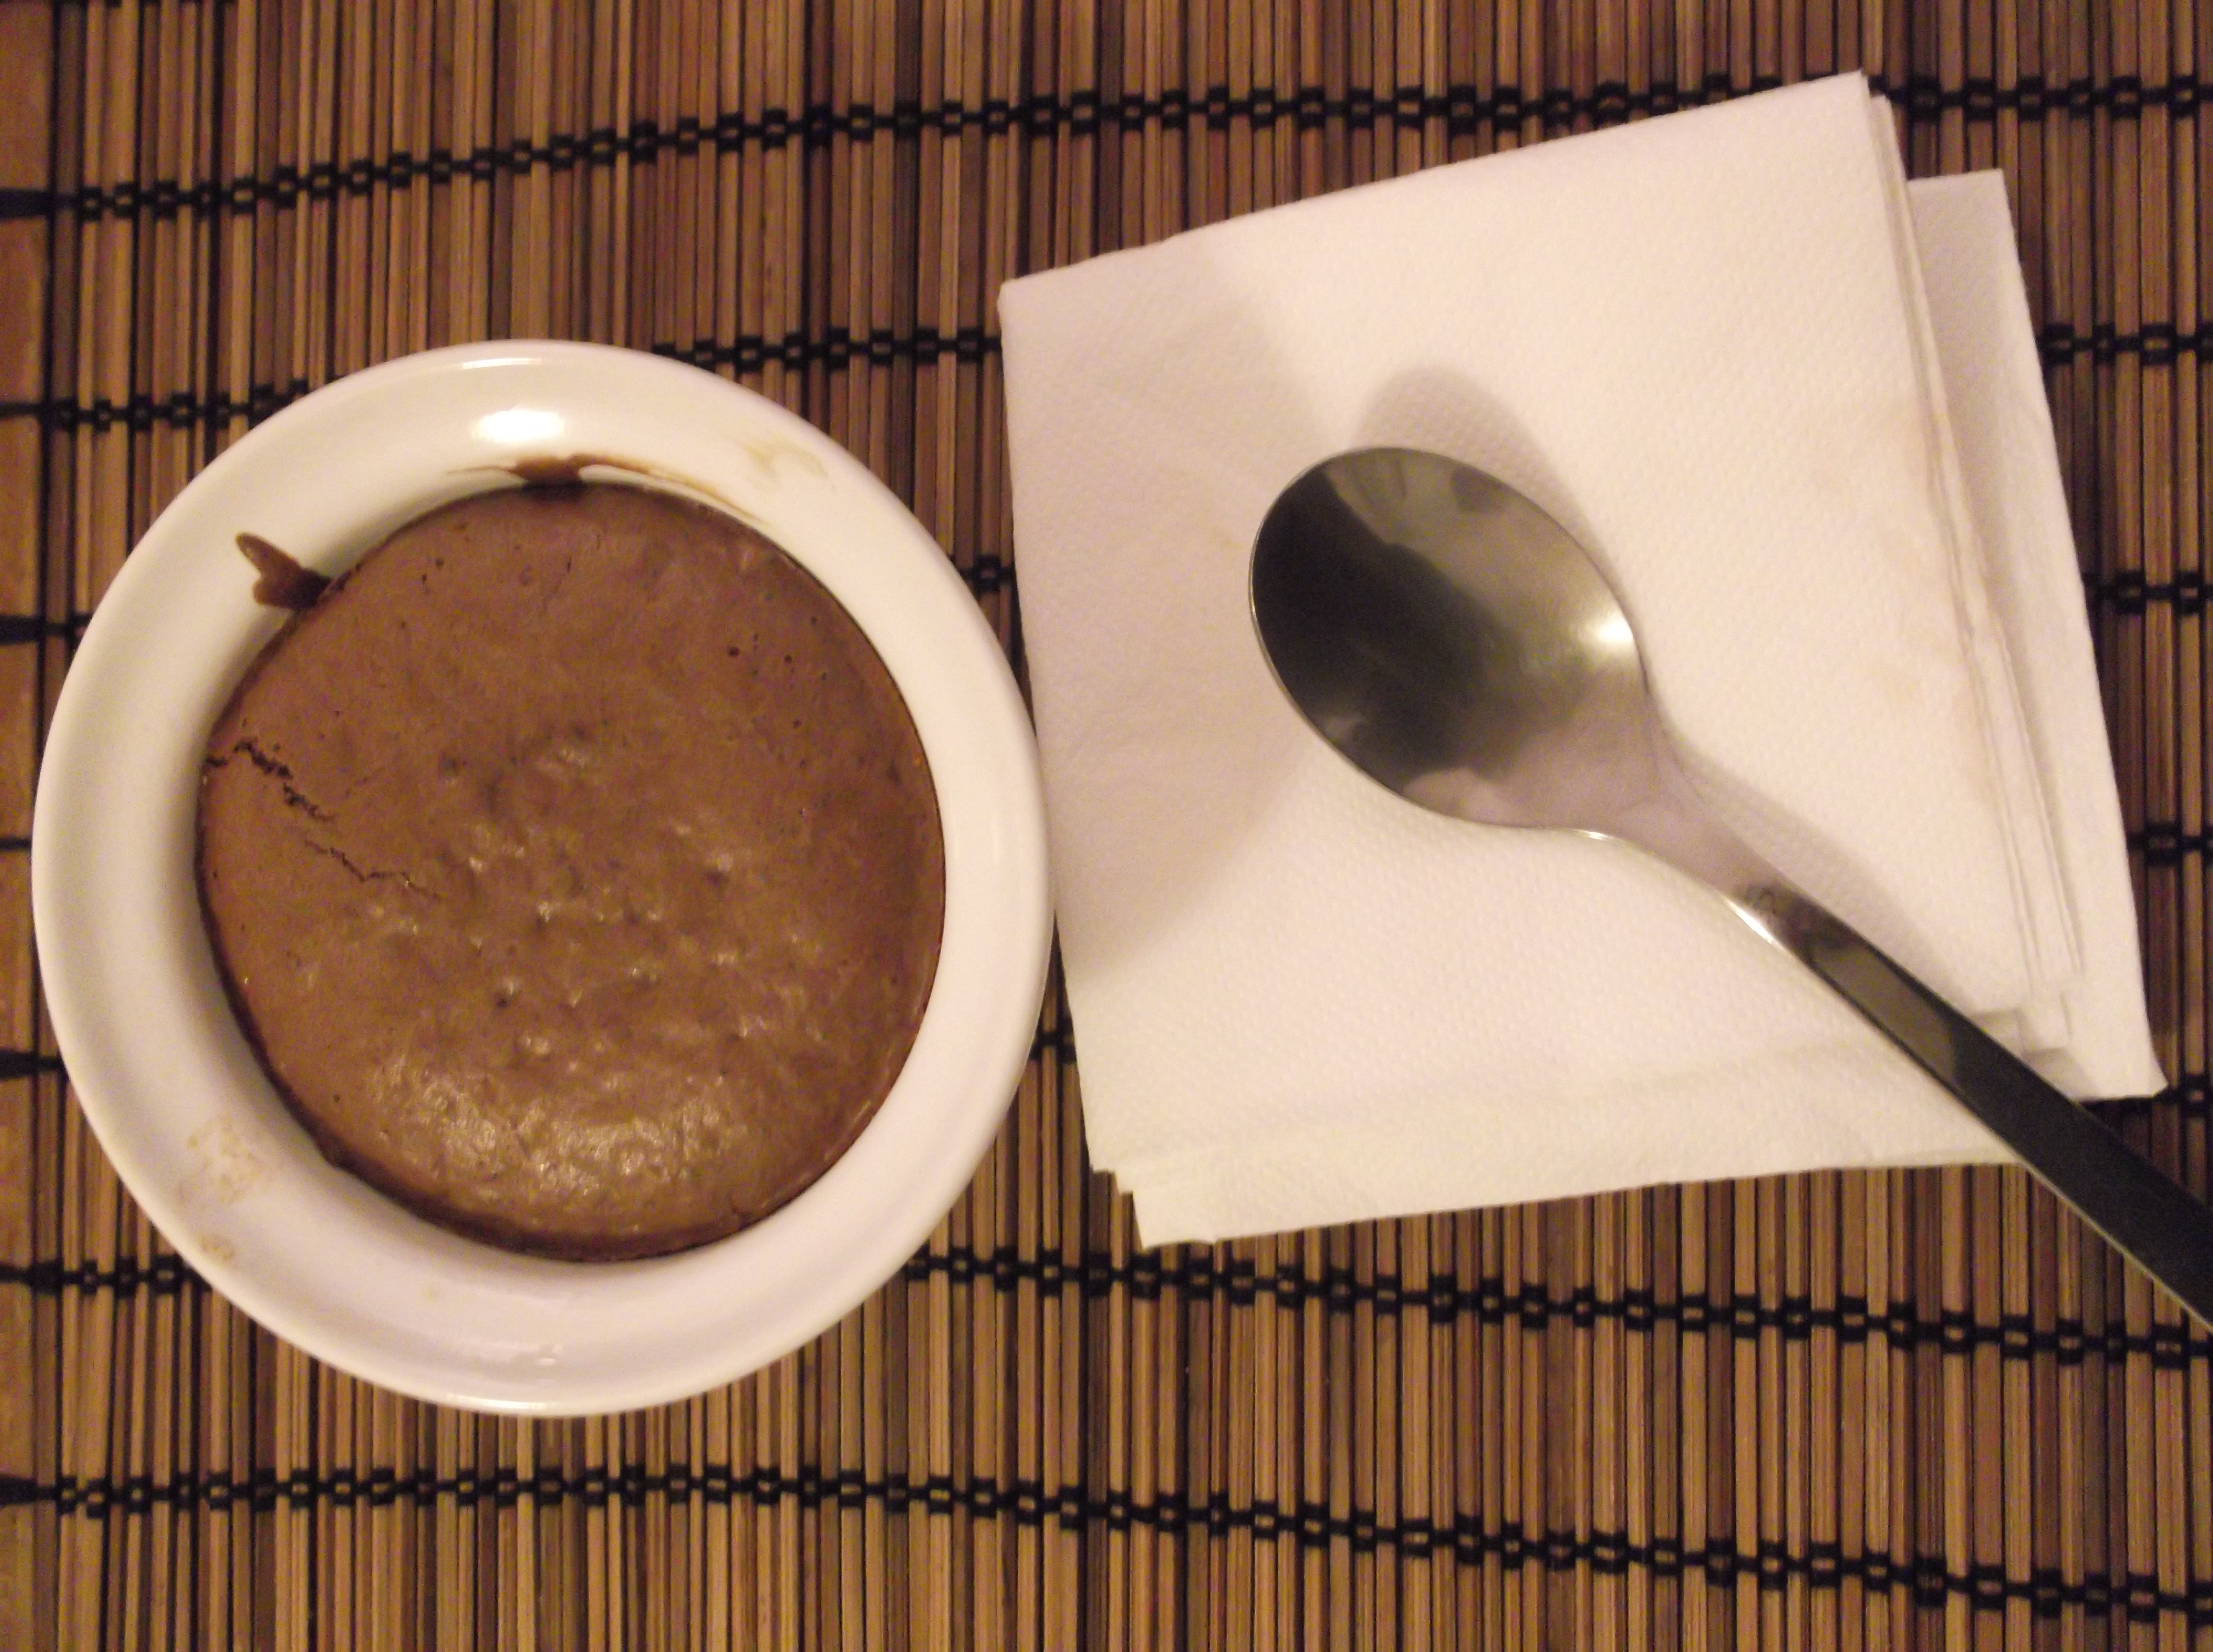 Chocolate Souffle with Melted Heart